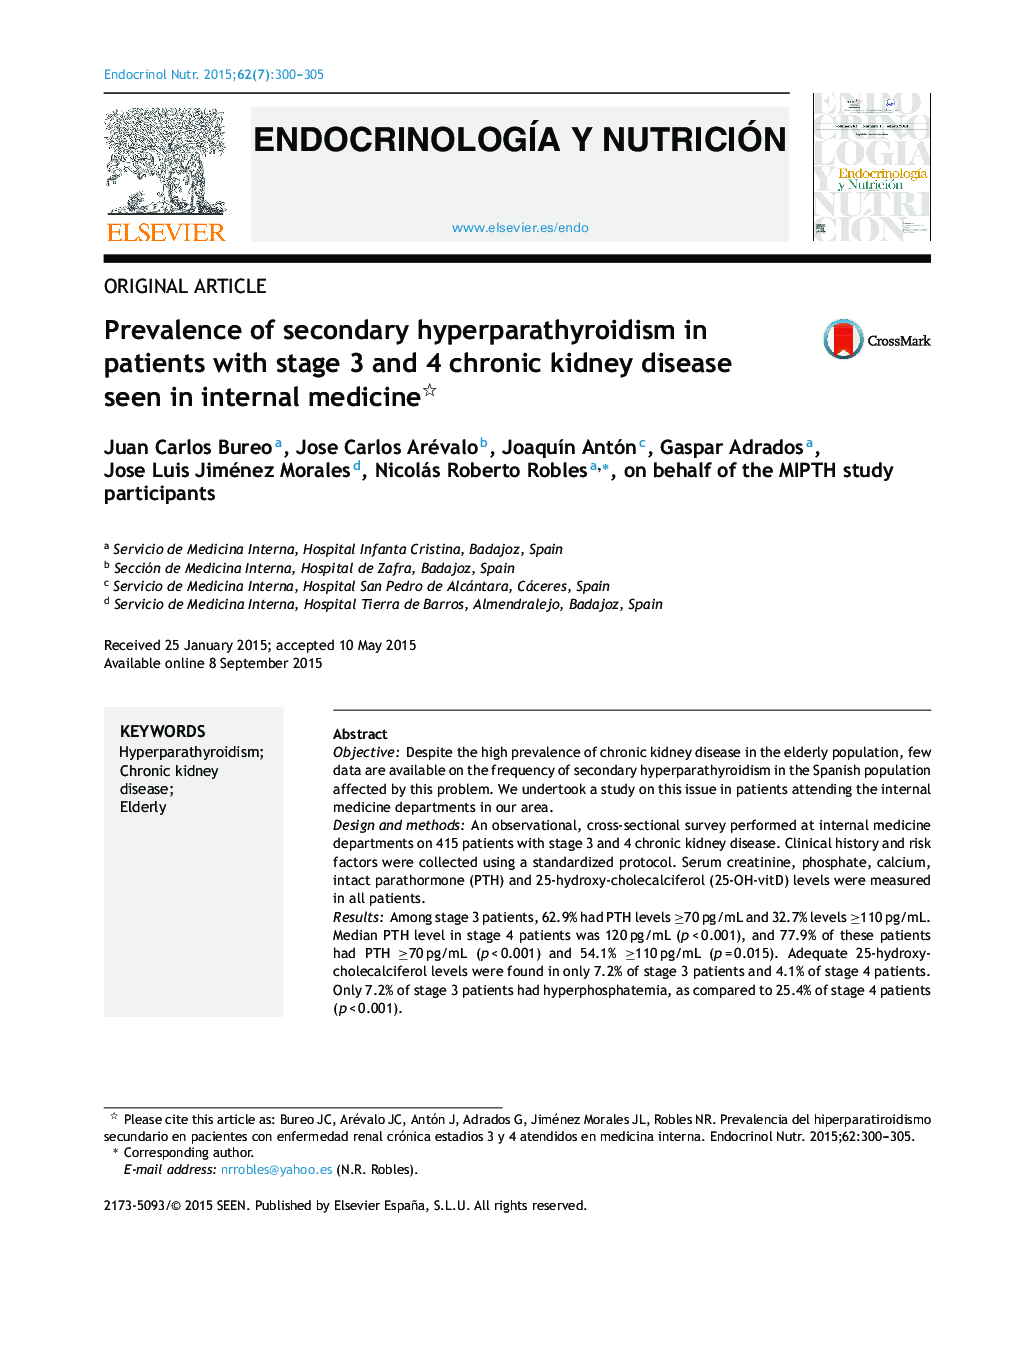 Prevalence of secondary hyperparathyroidism in patients with stage 3 and 4 chronic kidney disease seen in internal medicine 